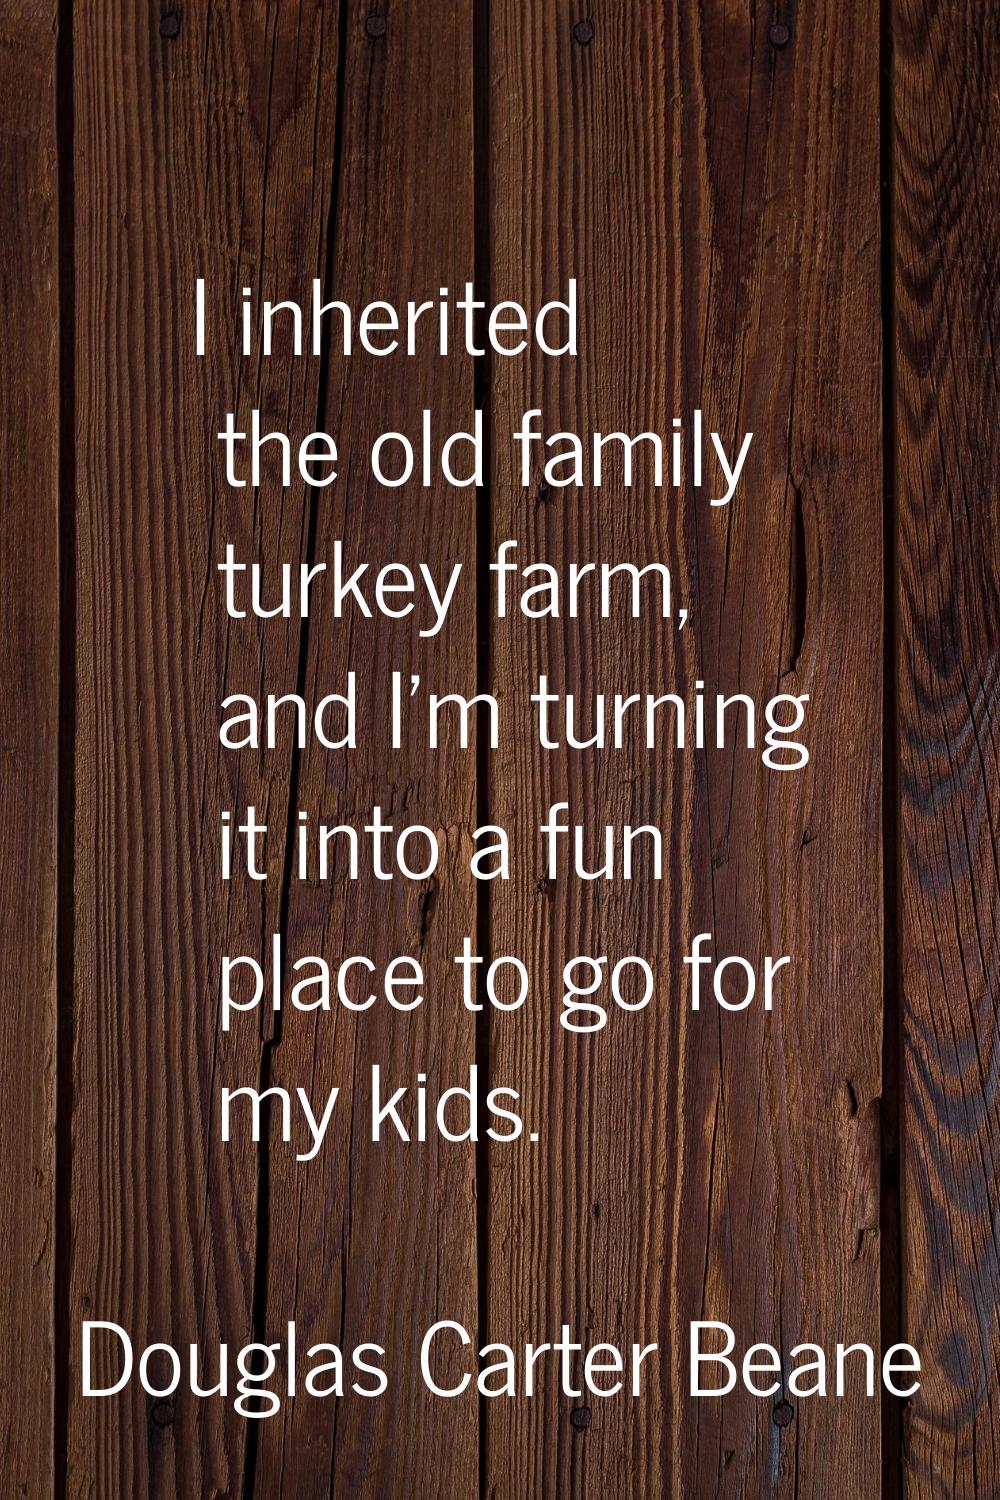 I inherited the old family turkey farm, and I'm turning it into a fun place to go for my kids.